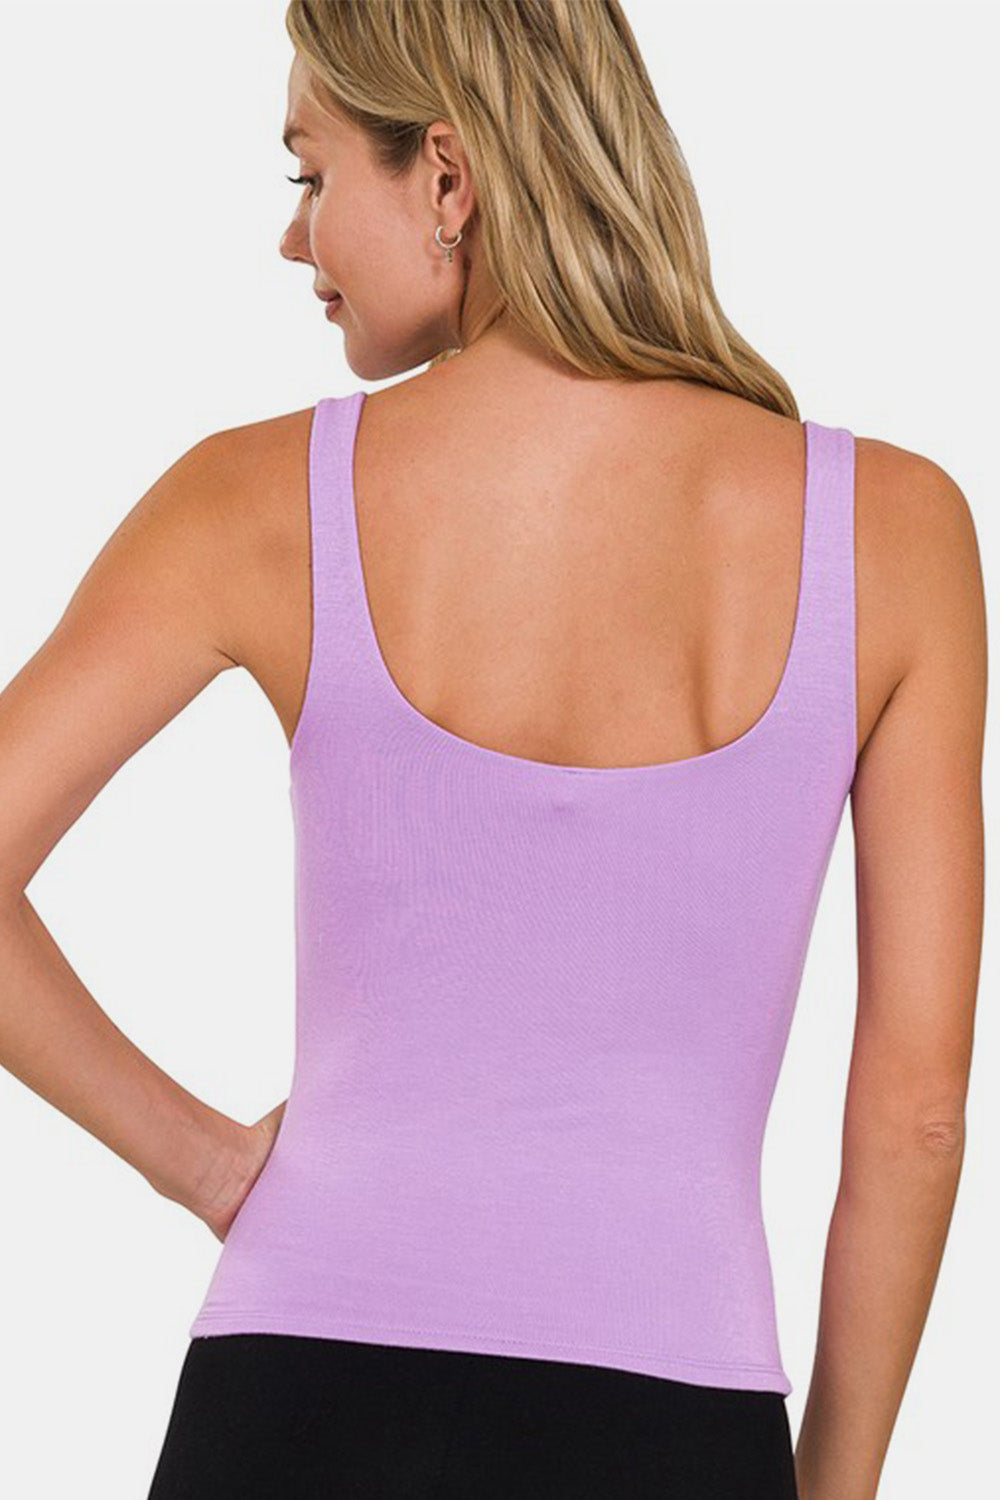 Zenana Tank Top - Double Layered - Lavender - Inspired Eye Boutique